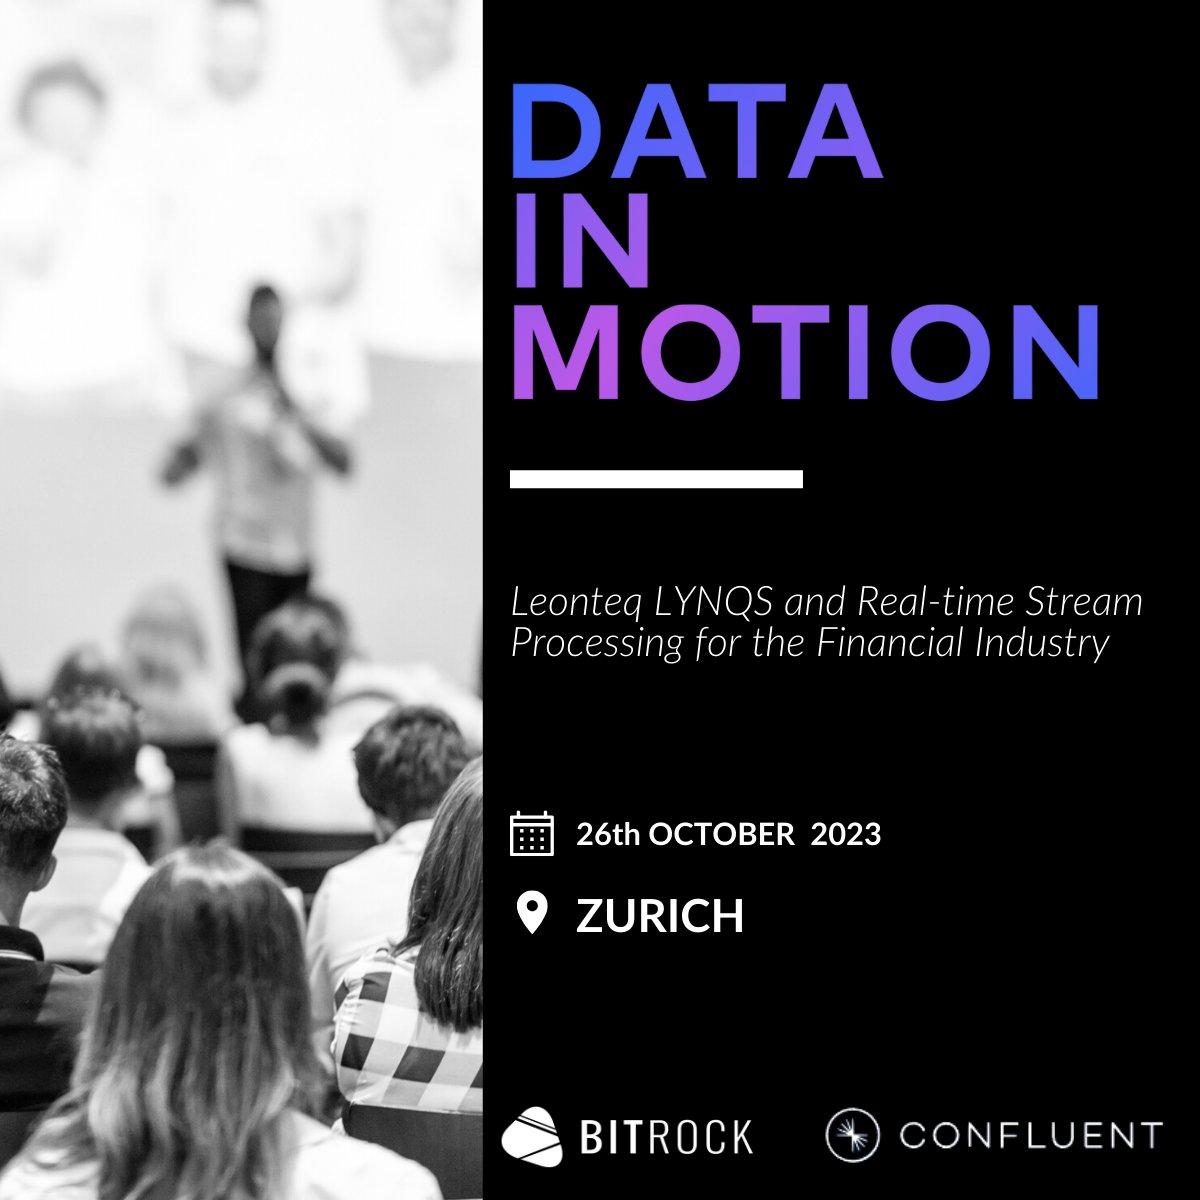 Only few weeks to @Confluent's Data in Motion Tour! 🚀

On 26 October, you will find us in Zurich, where several experts will discuss the trends that are defining the future of real-time data and #Kafka.

#DataInMotionTour  #datastreaming #ApacheKafka @confluentinc